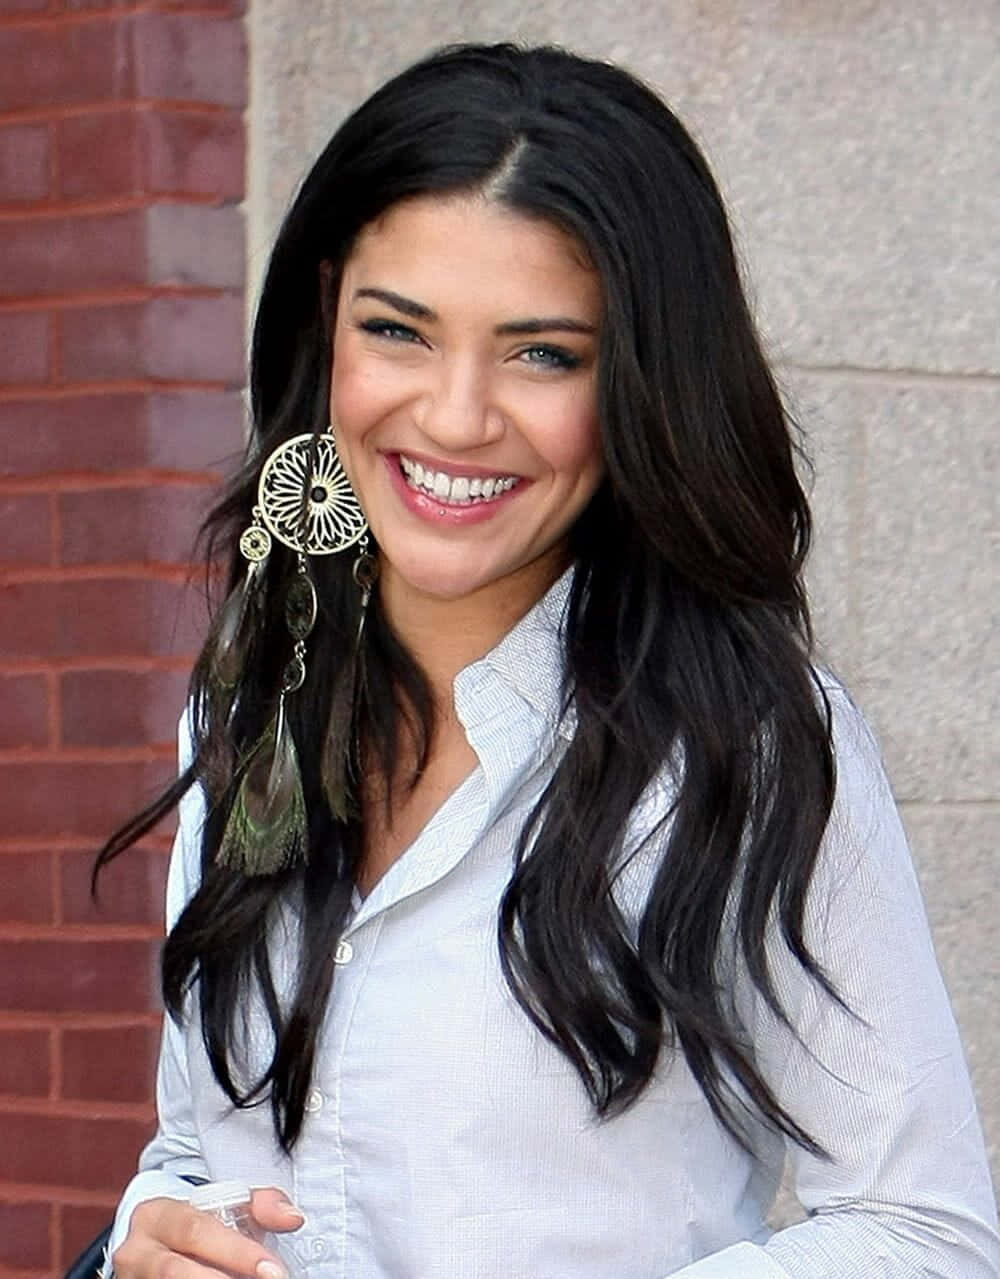 Jessica Szohr Posing Gracefully In A Photoshoot